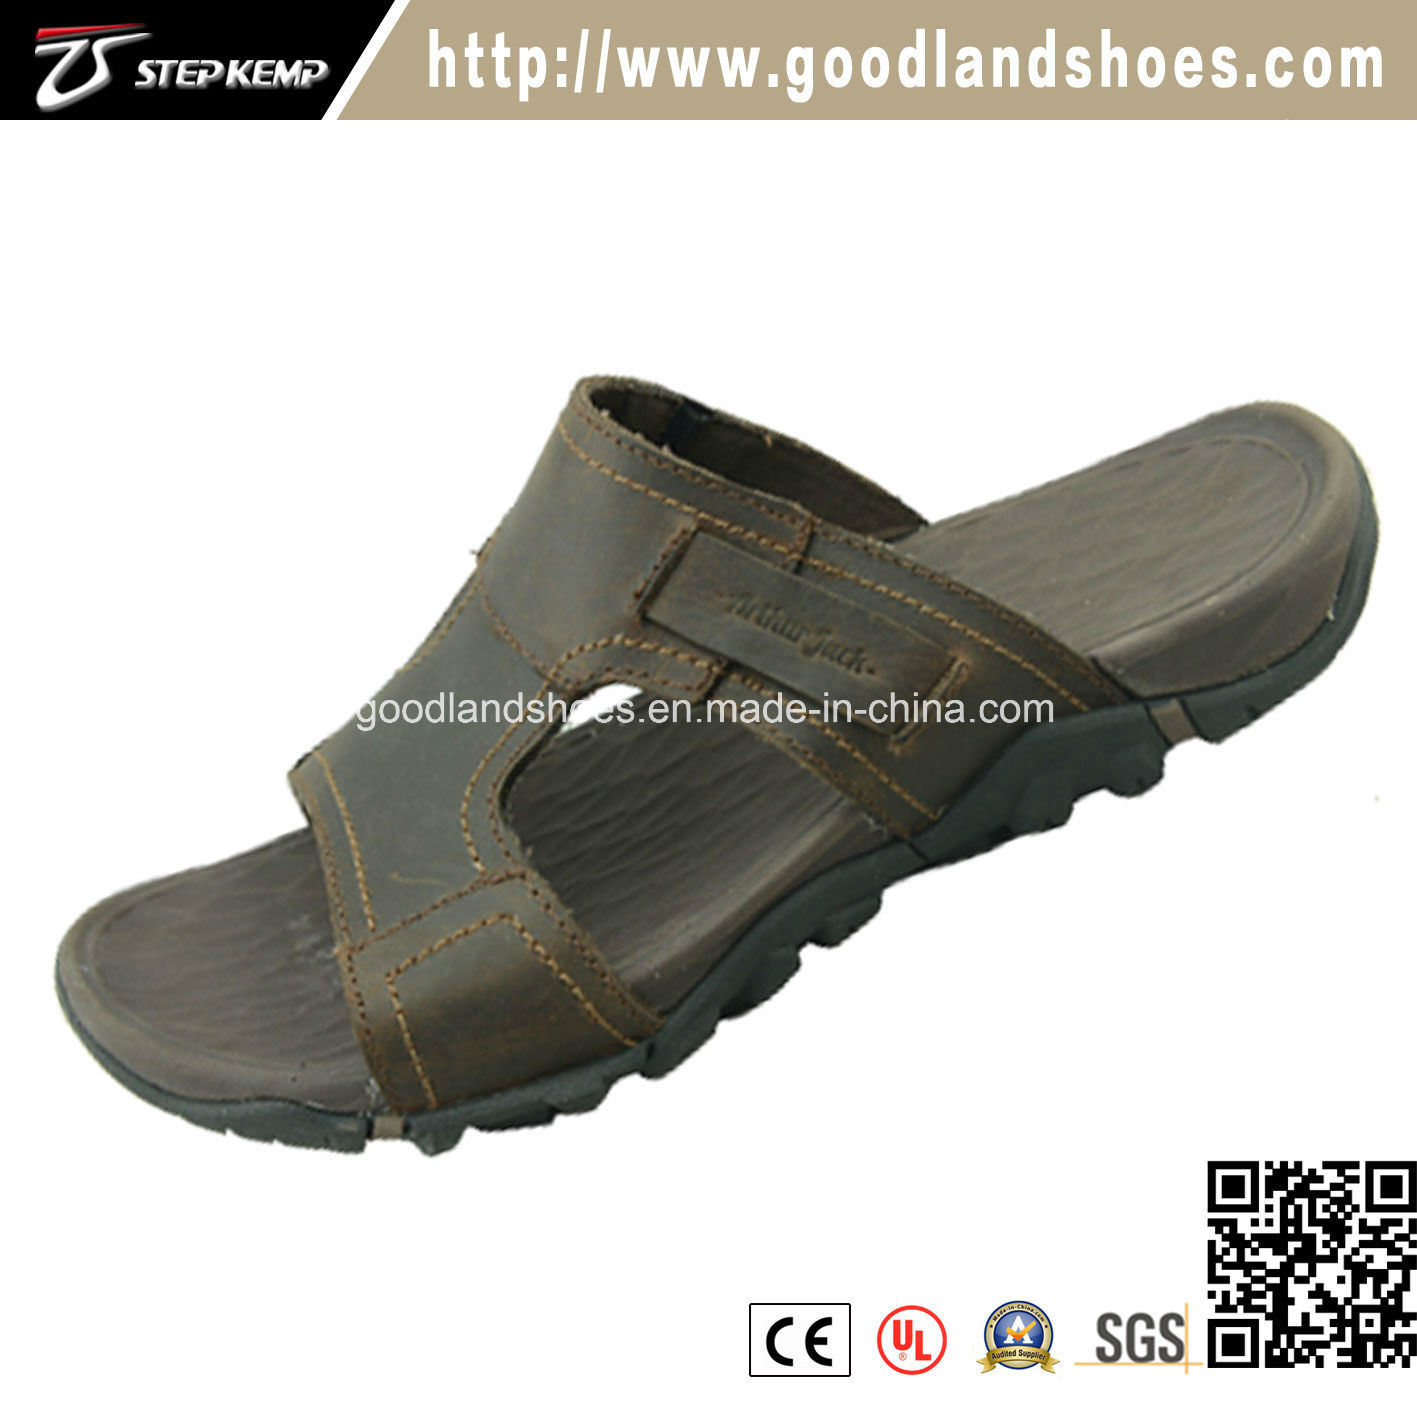 New Summer Casual Beach Slippers Resistant Anti-Skid Shoes 20045